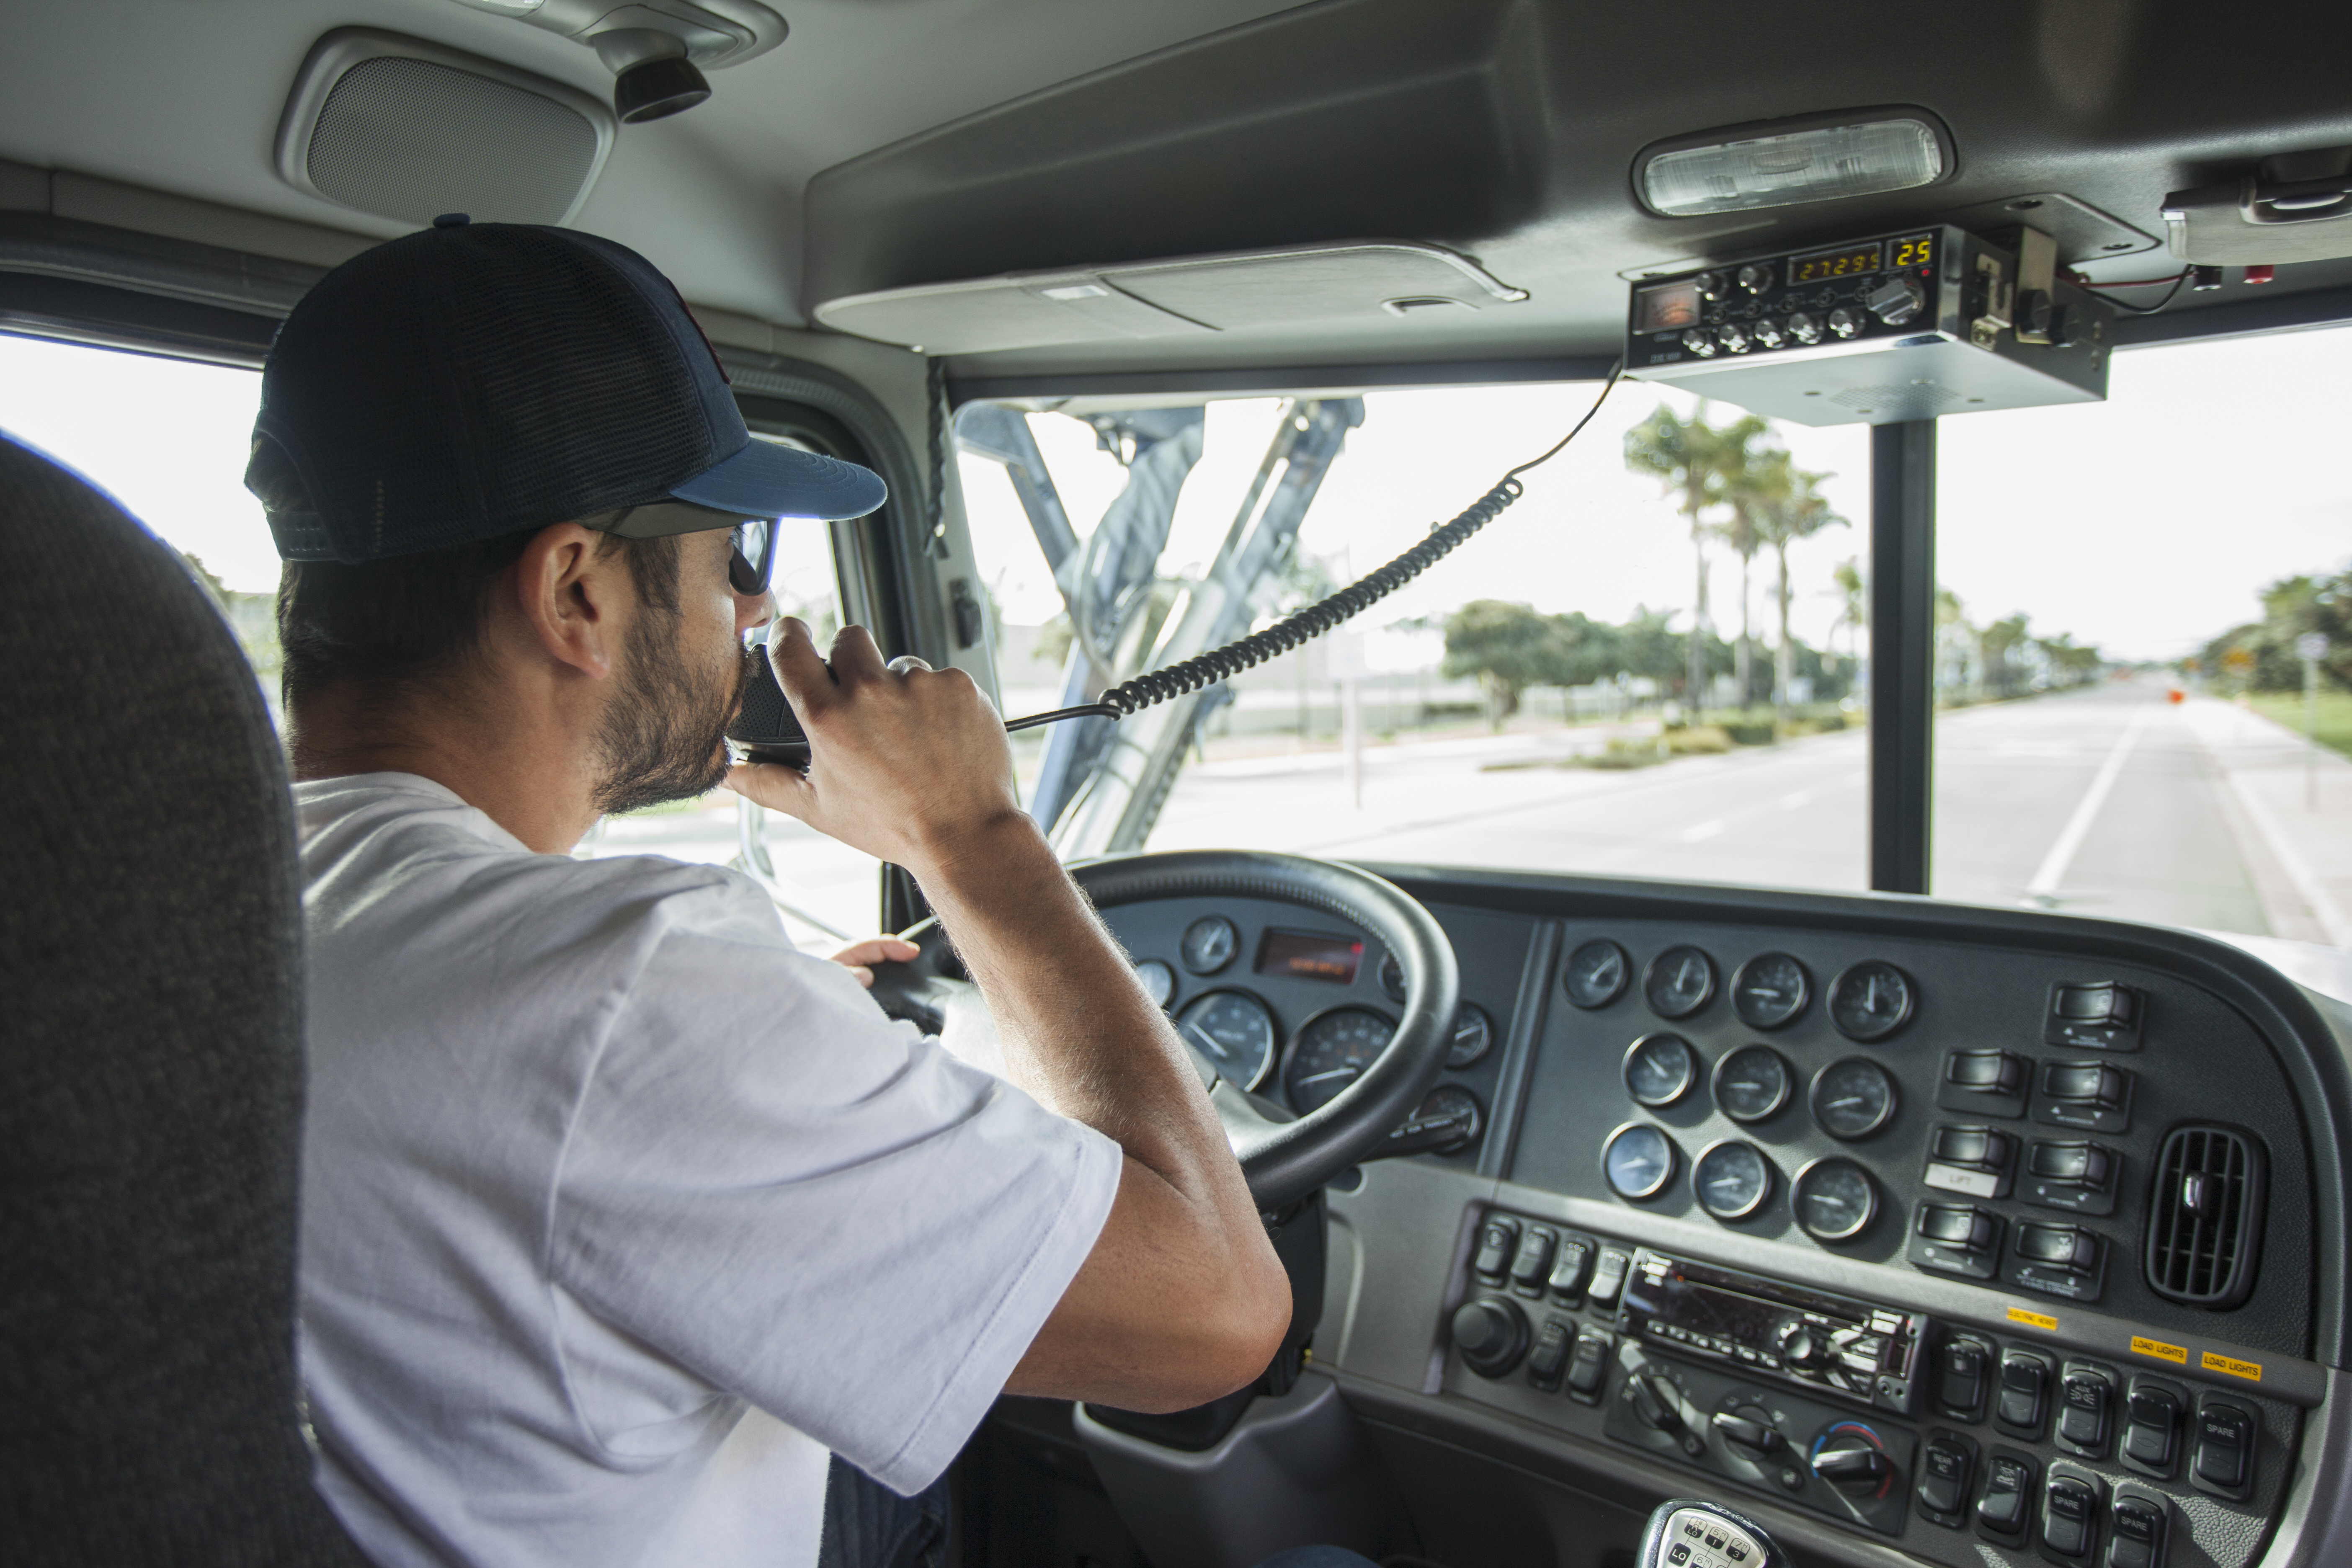 6 Things Every Trucker Should Take With Them On The Road